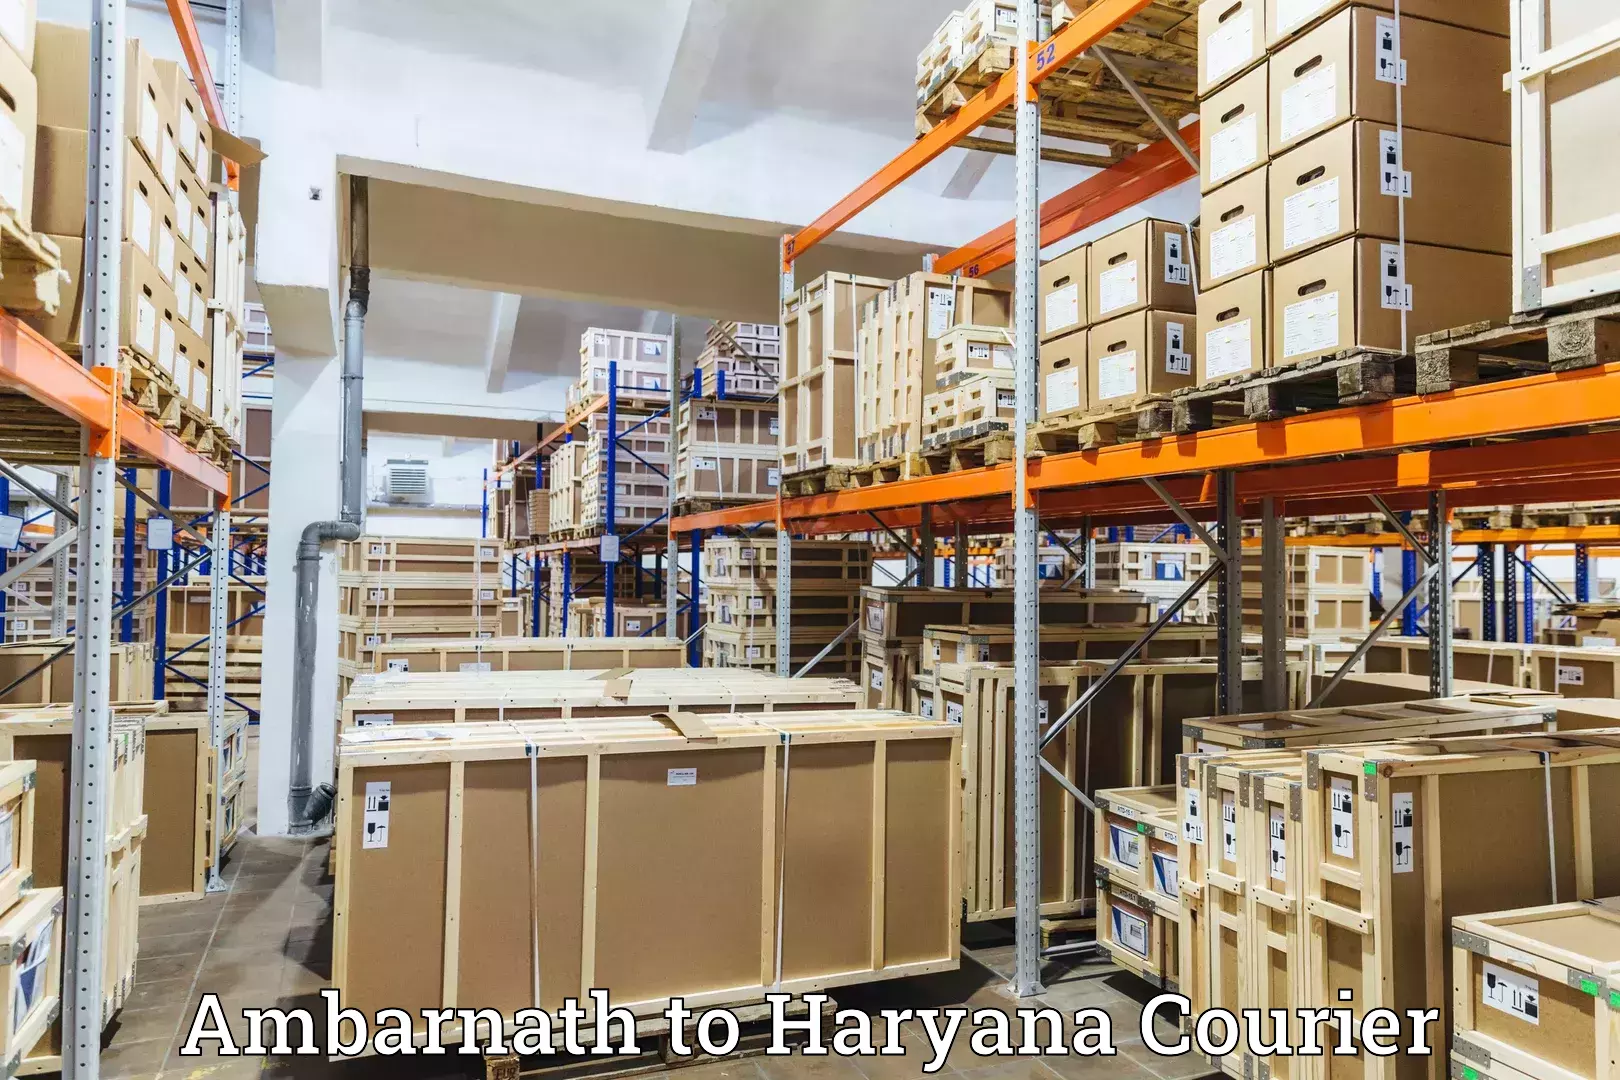 Cost-effective courier options Ambarnath to Gurgaon